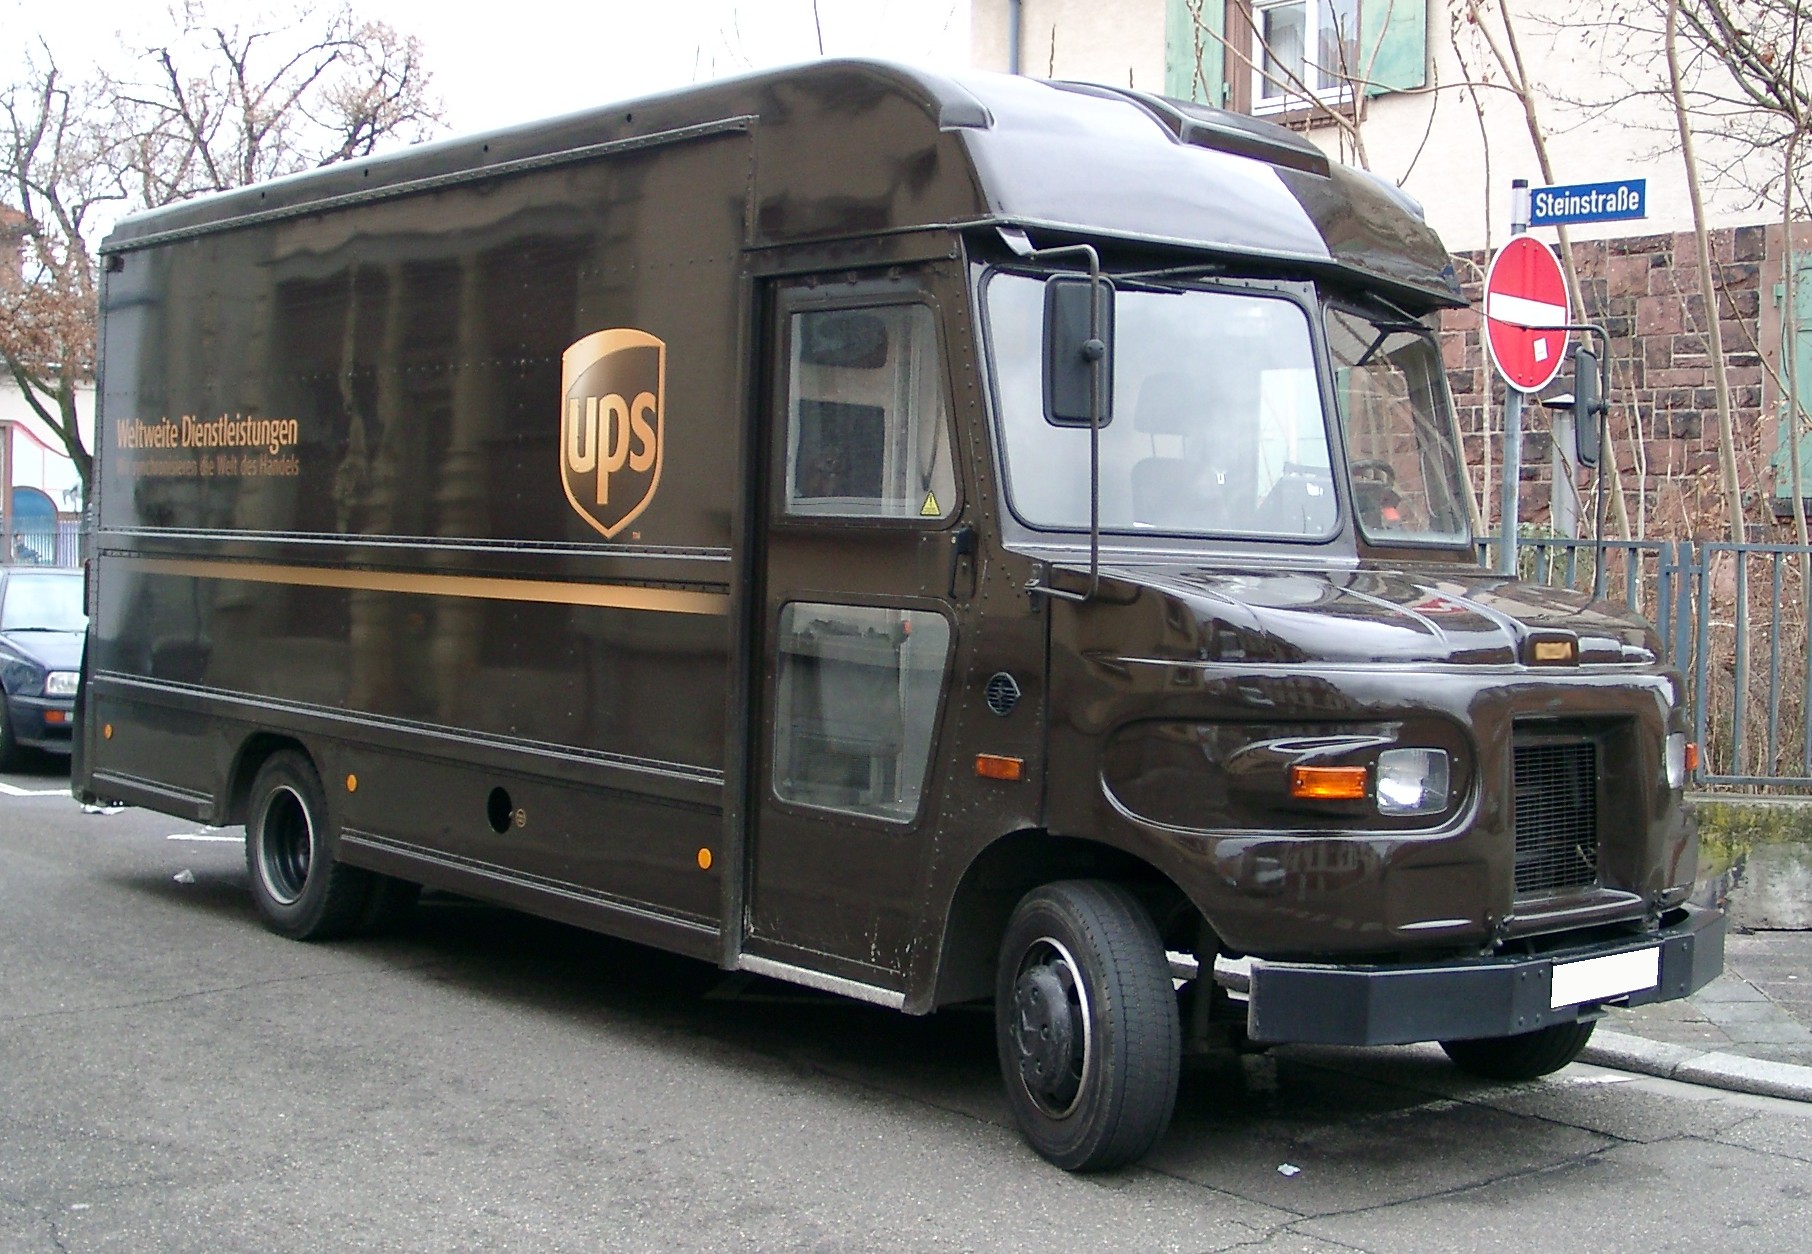 File:UPS Truck front 20080118.jpg - Wikimedia Commons